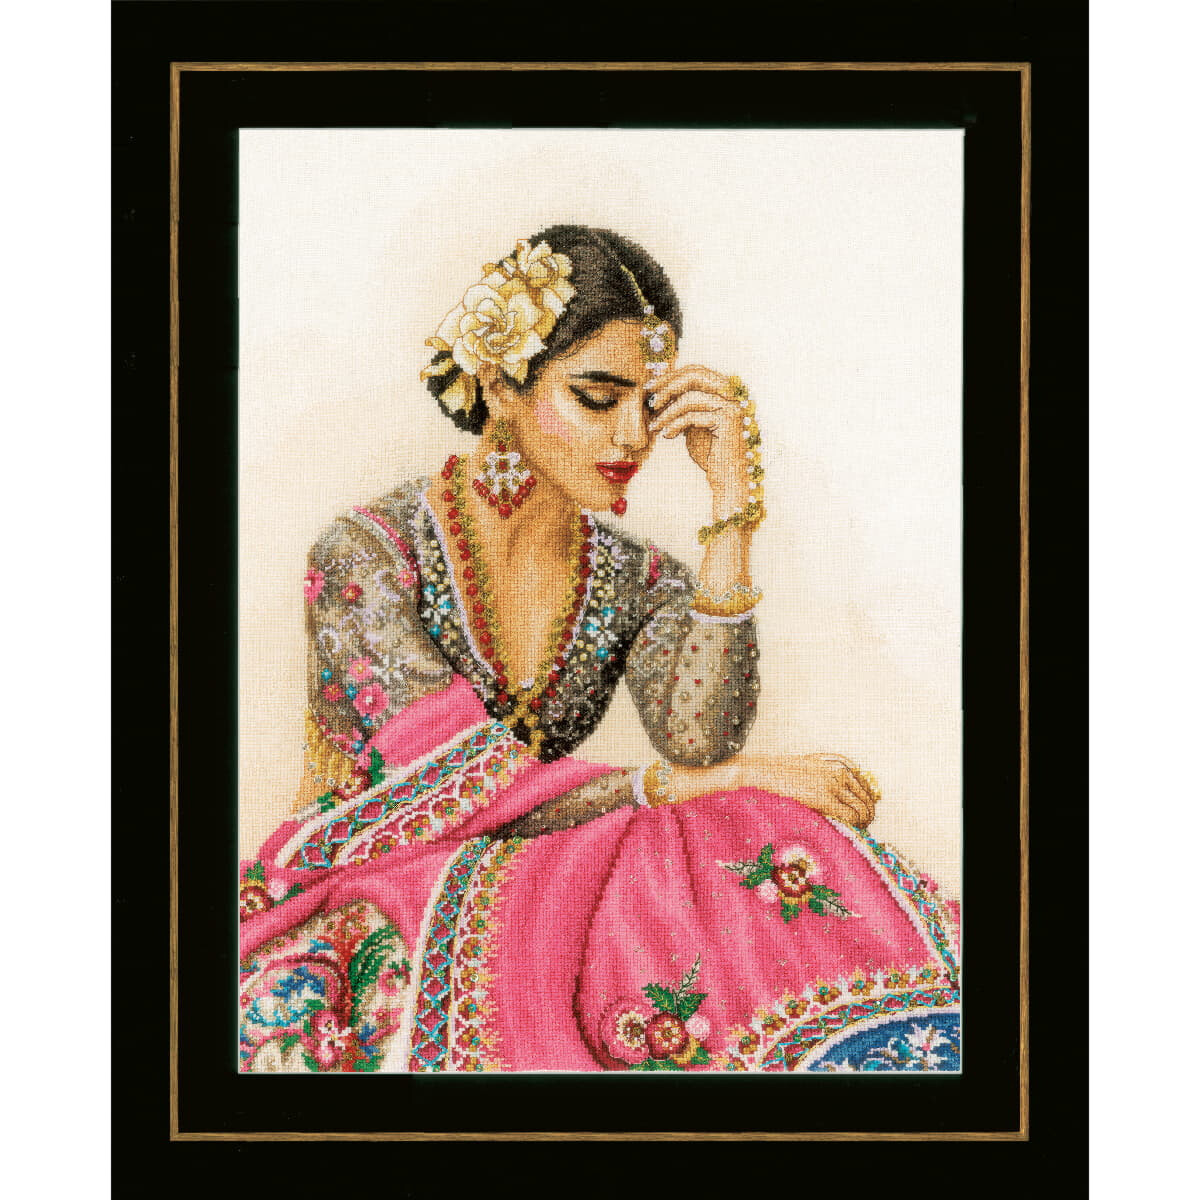 A painting of a woman in traditional, colorful clothing...